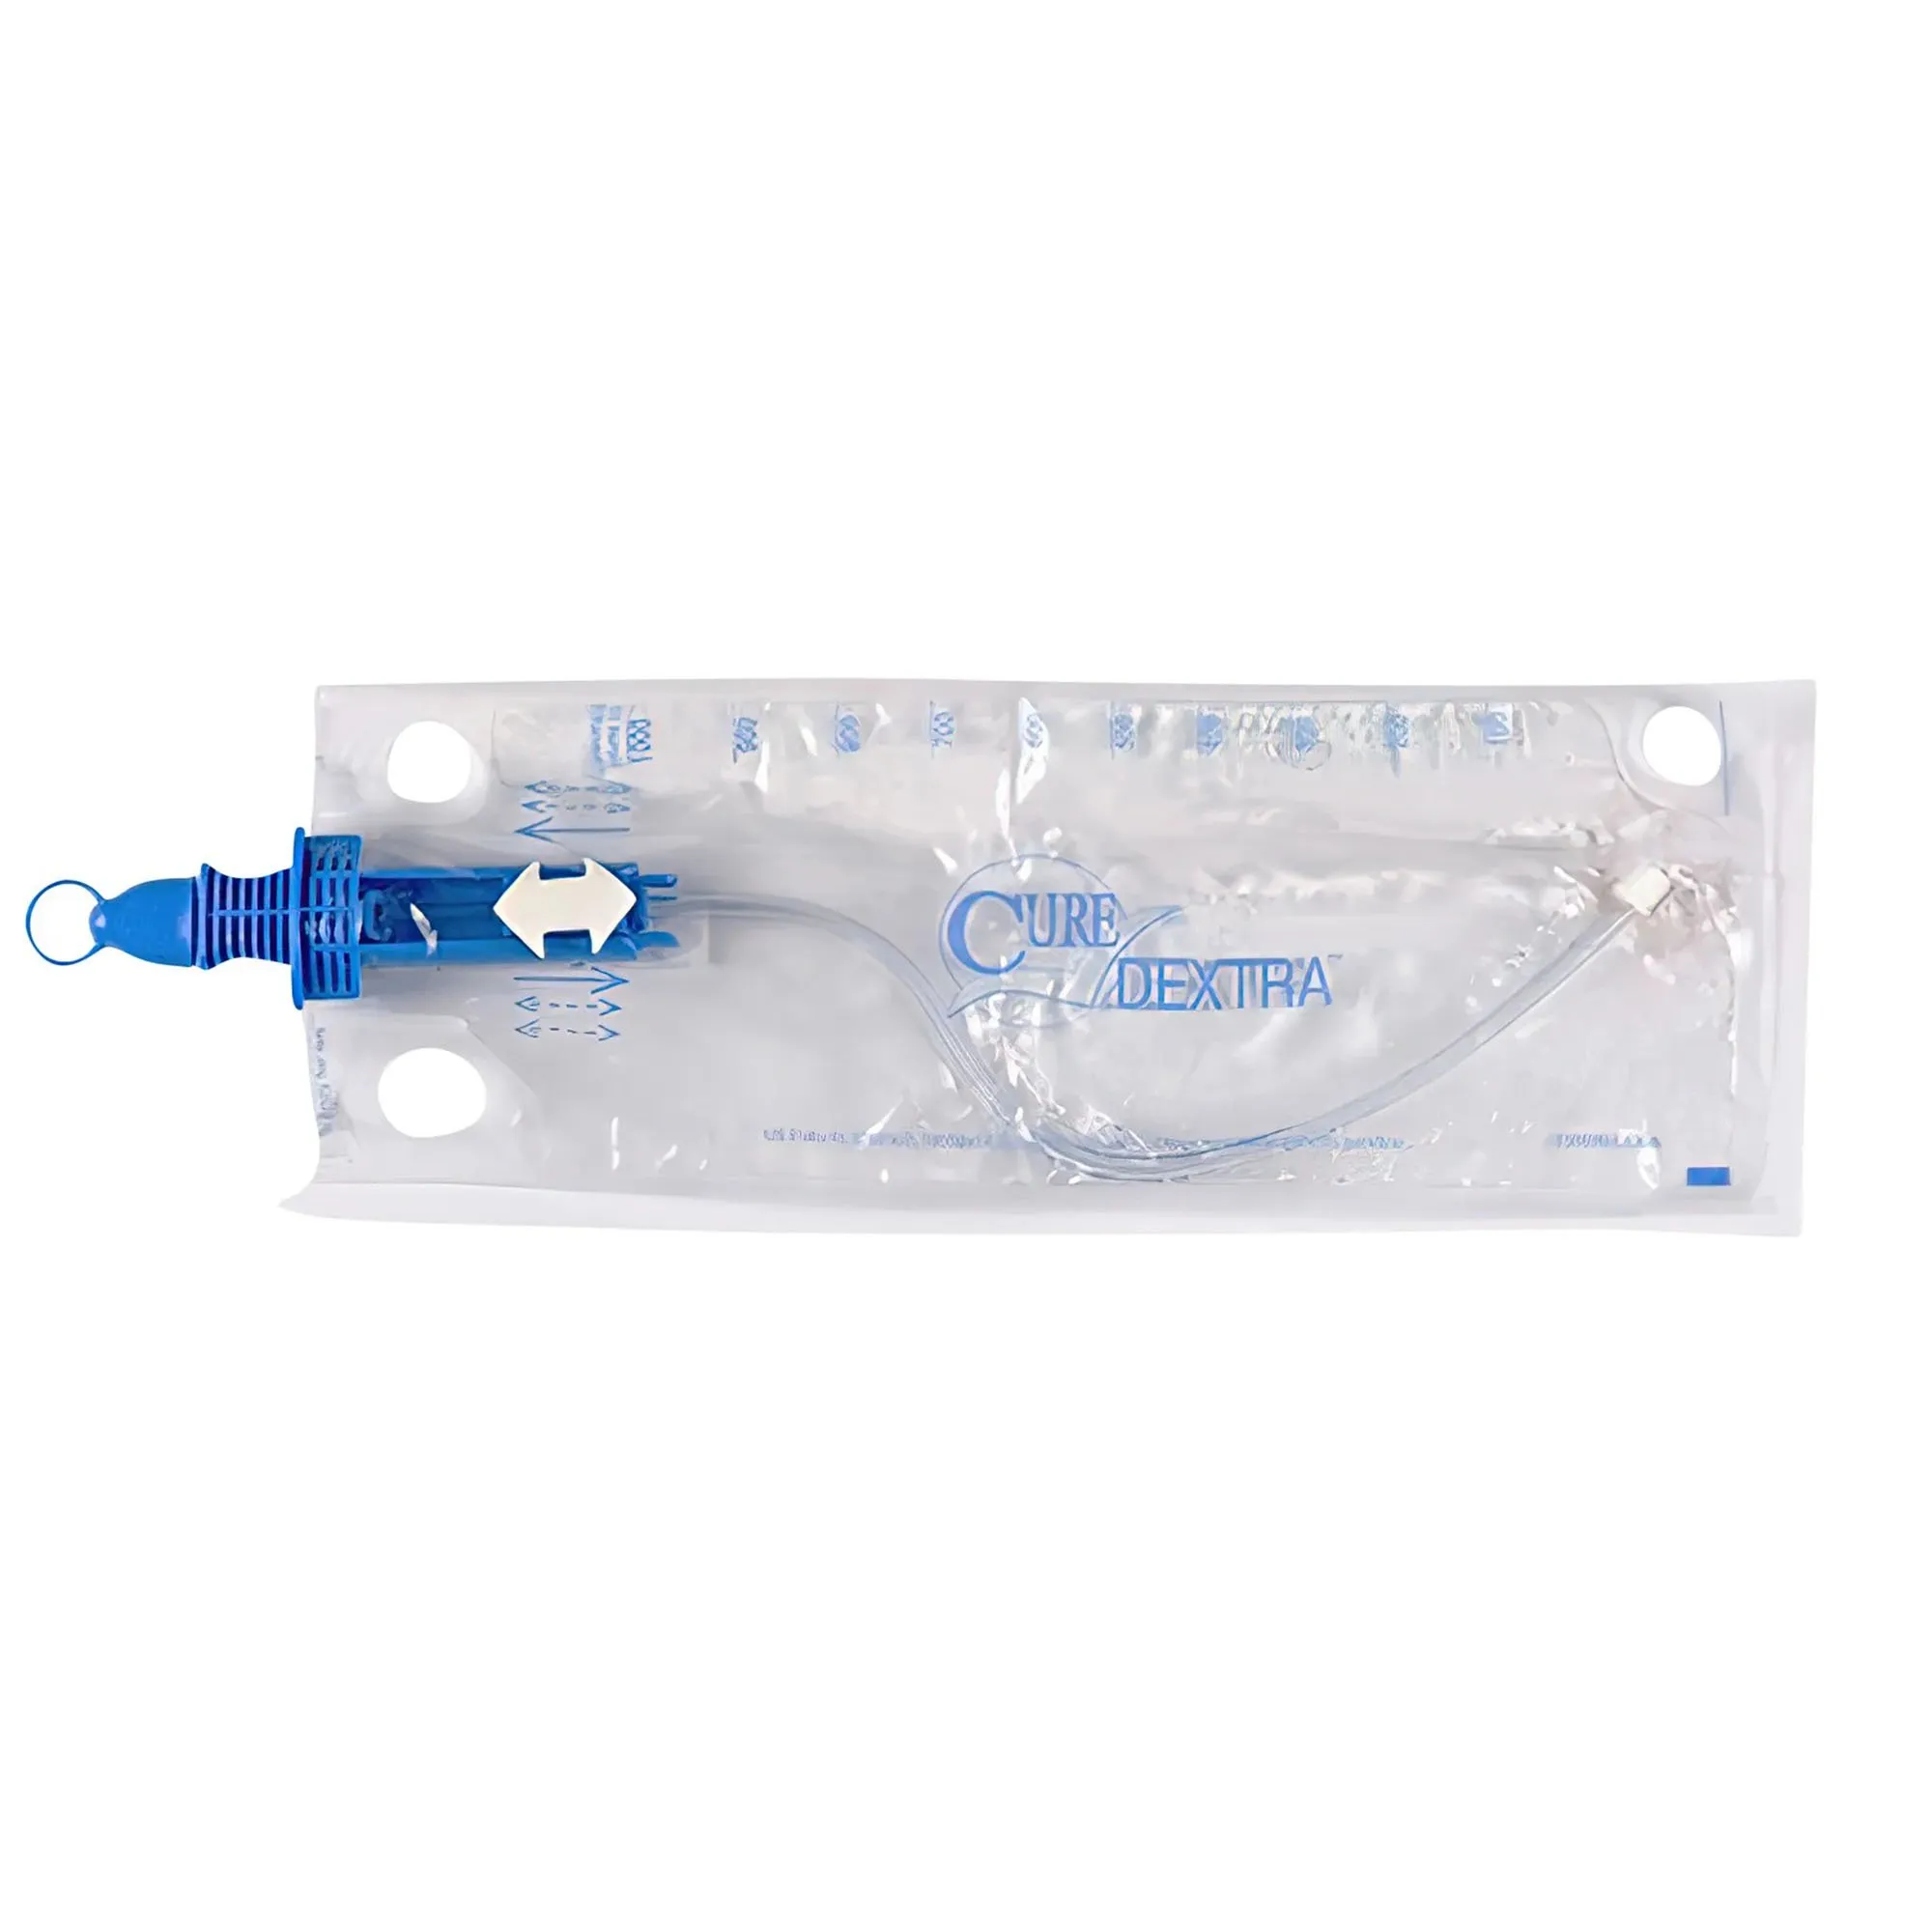 Cure - Dex16 - Dextra Cure Catheter Closed System Kit, 16 Fr